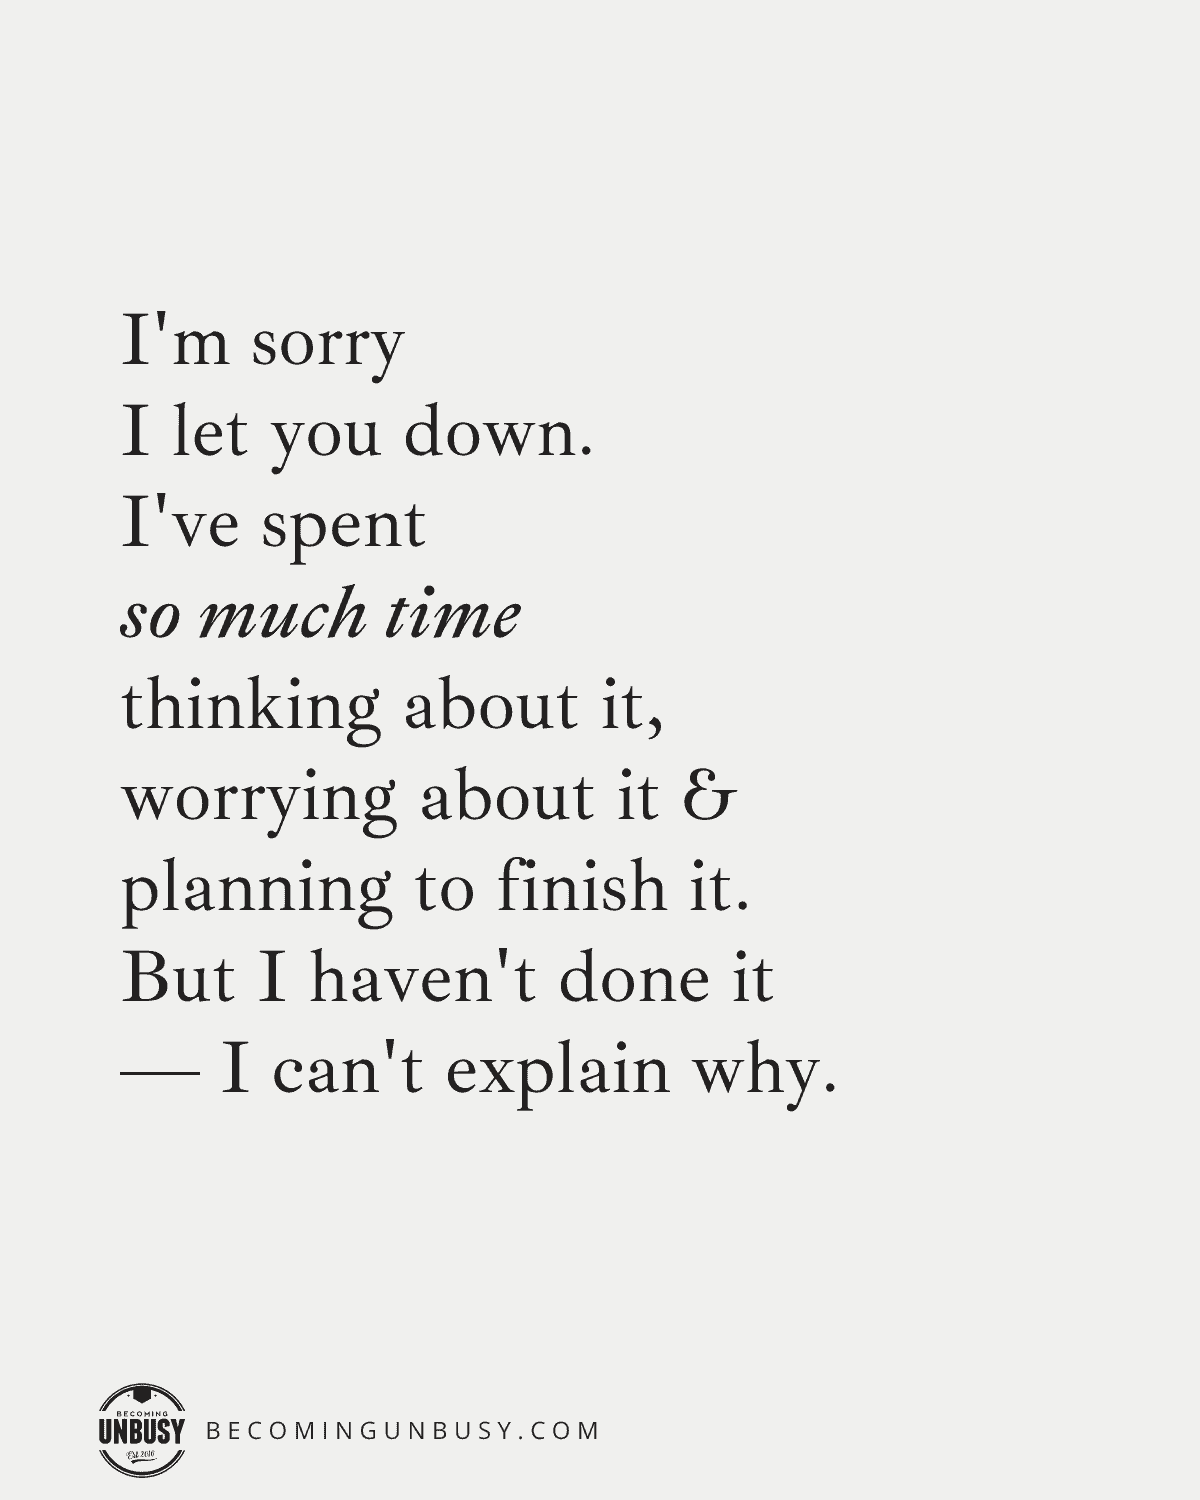 I'm sorry I let you down.
I've spent so much time thinking about it,
worrying about it, and planning to finish it.
But I haven't done it — I can't explain why.